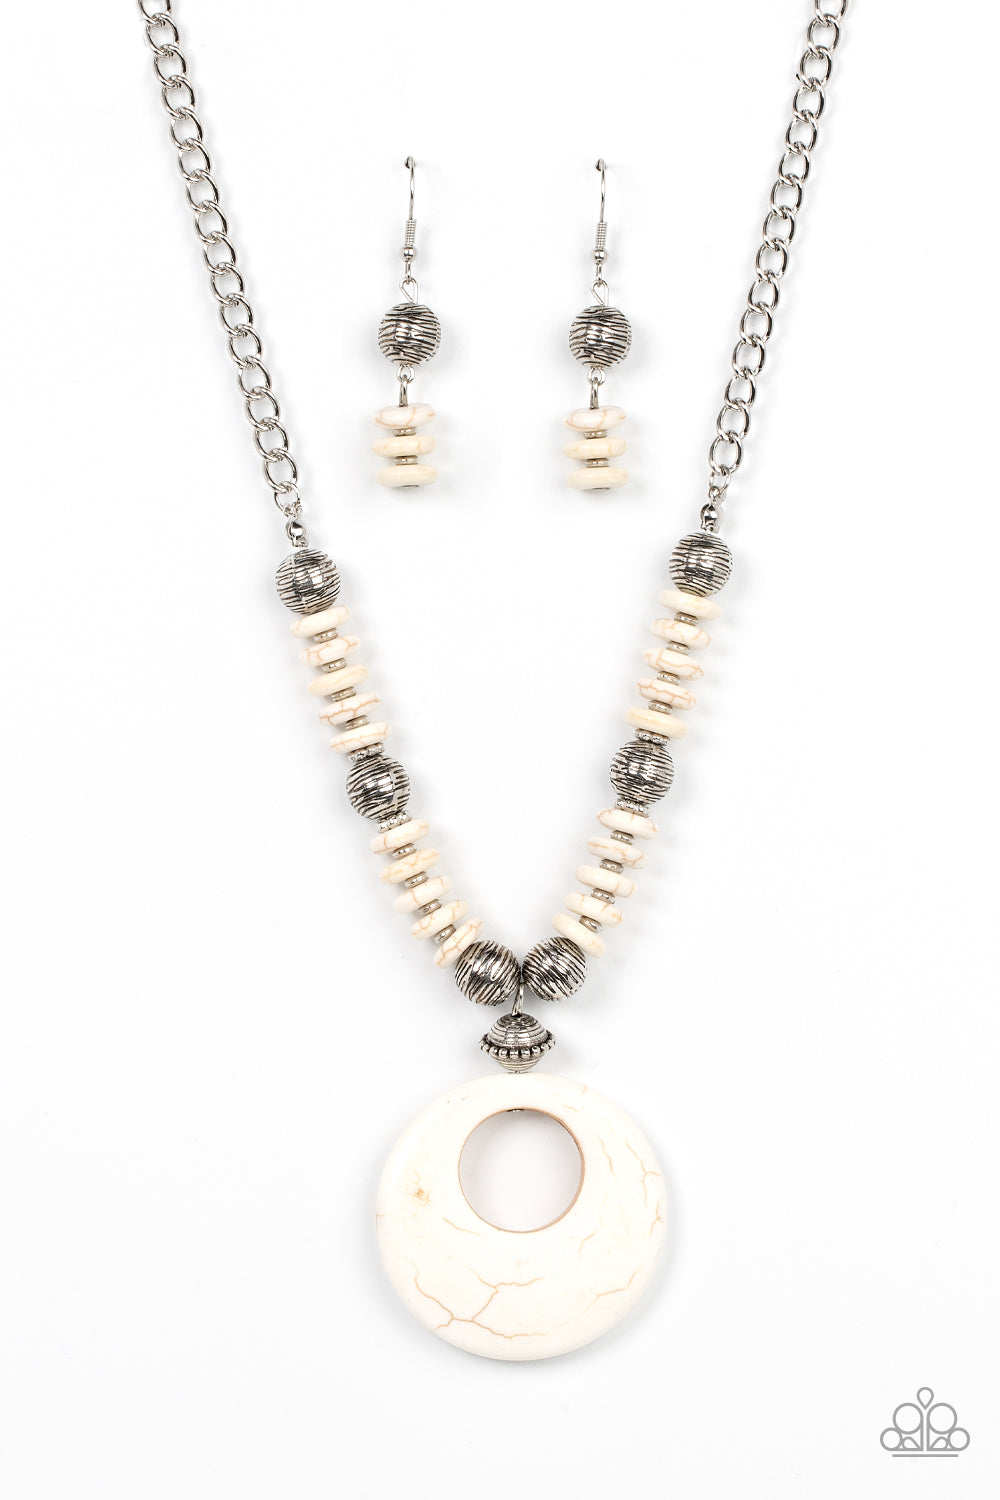 Oasis Goddess White Necklace - Paparazzi Accessories  Infused with dainty silver accents, mismatched silver beads and white stone discs are threaded along an invisible wire below the collar. An oversized white stone pendant swings from the center of the earthy strand, creating a natural pop of seasonal inspiration. Features an adjustable clasp closure.  Sold as one individual necklace. Includes one pair of matching earrings.